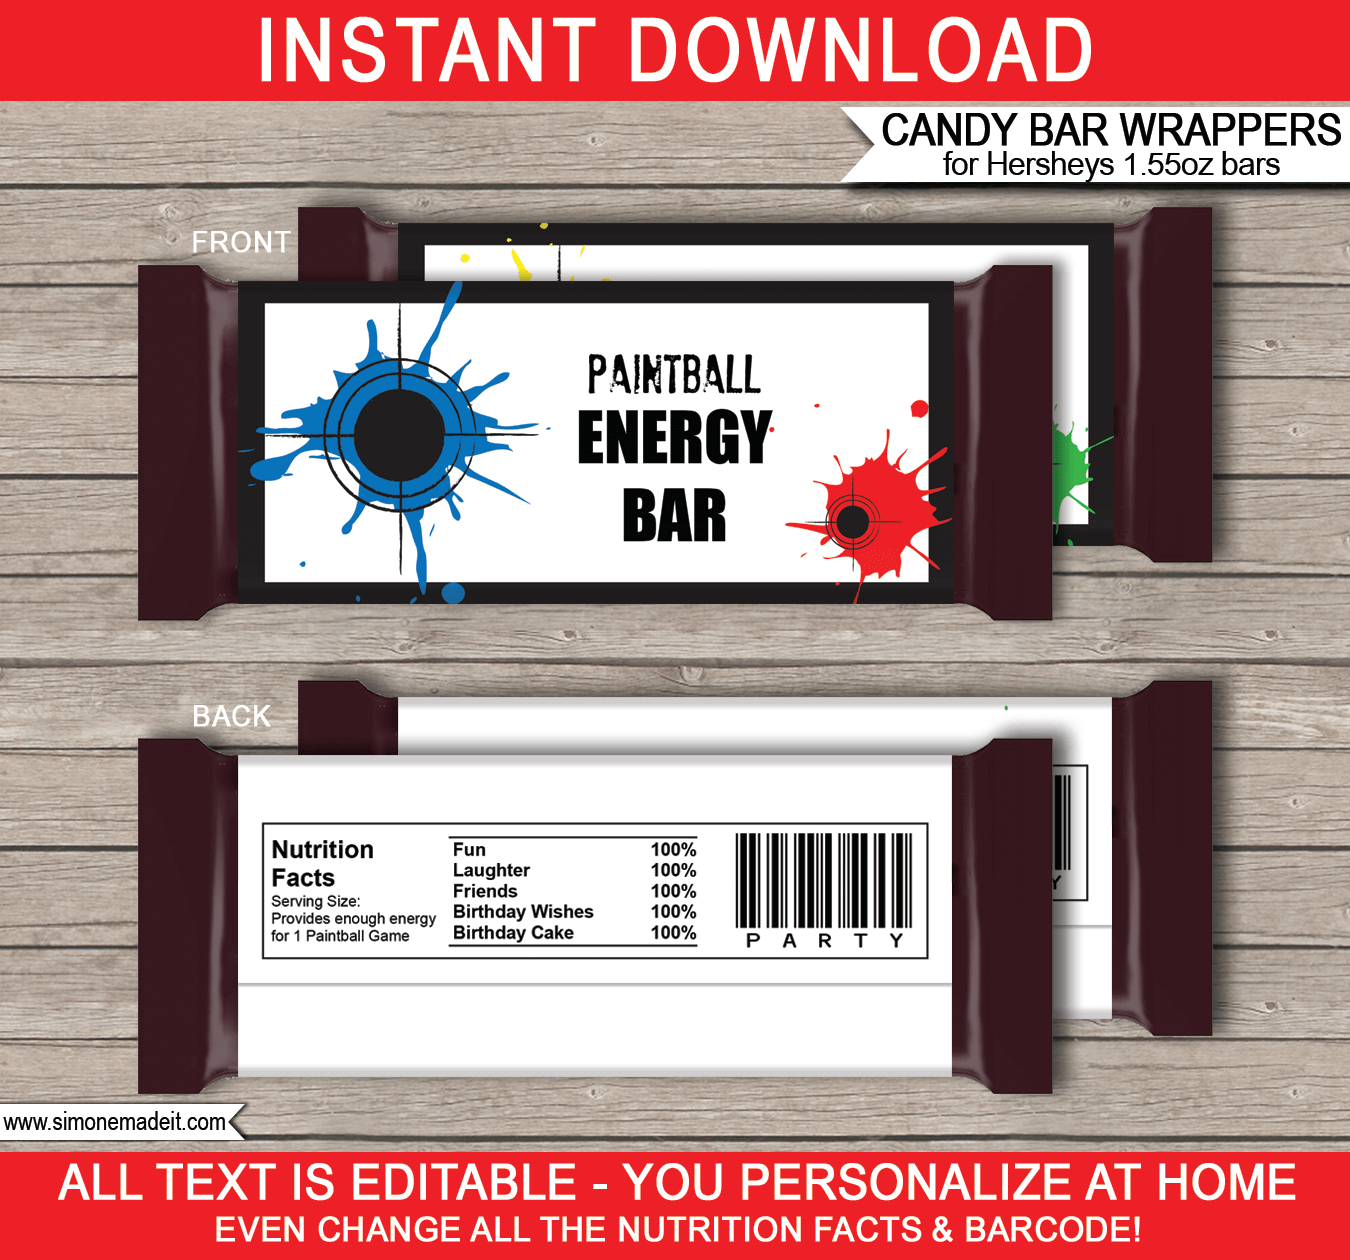 Paintball Hershey Candy Bar Wrappers | Birthday Party Favors | Personalized Candy Bars | Editable Template | INSTANT DOWNLOAD $3.00 via simonemadeit.com